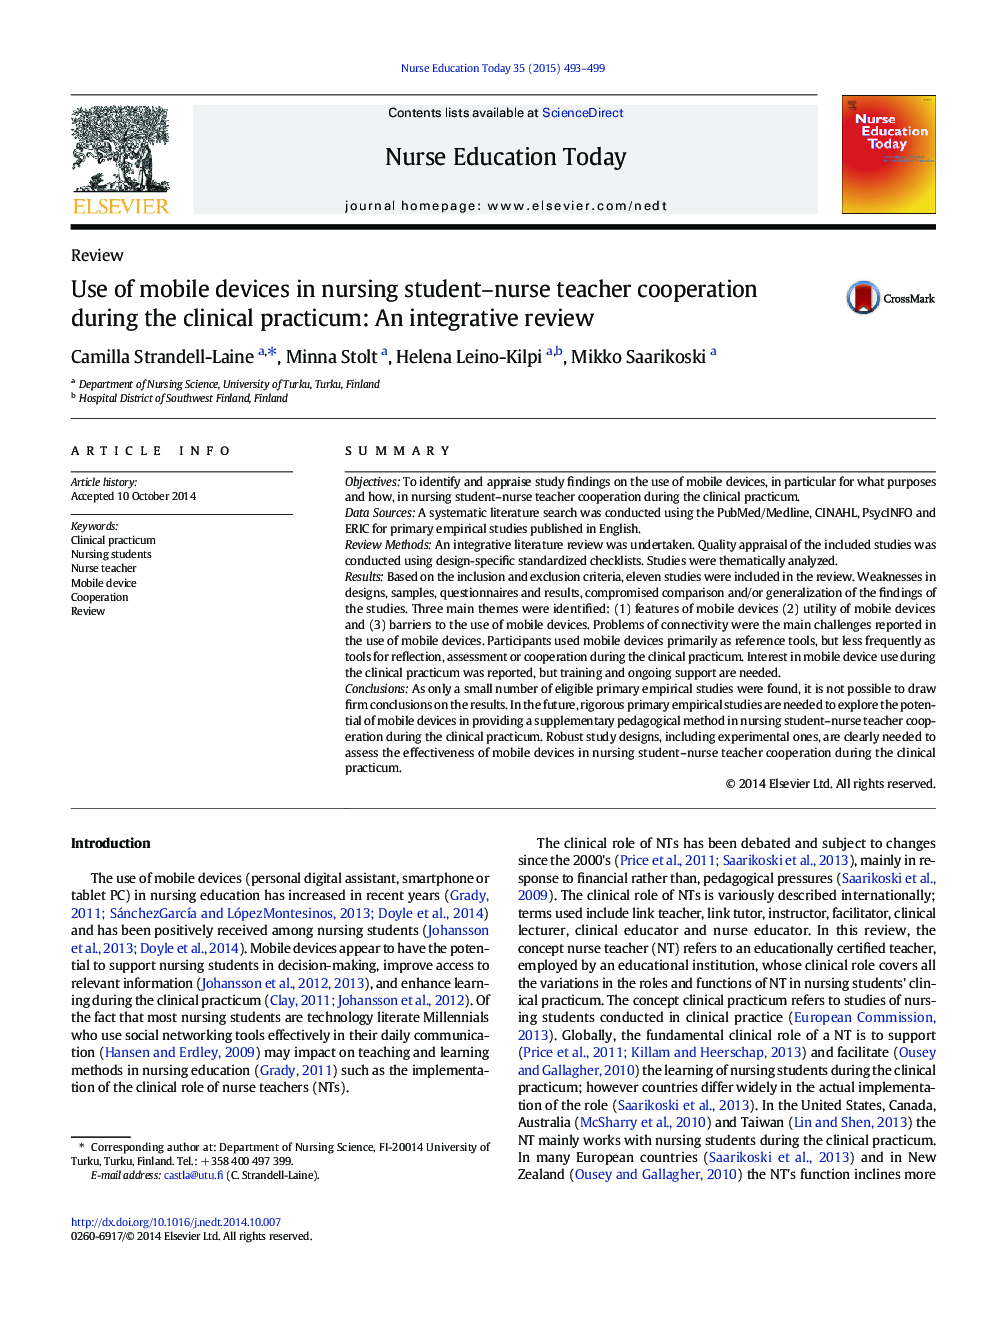 Use of mobile devices in nursing student–nurse teacher cooperation during the clinical practicum: An integrative review